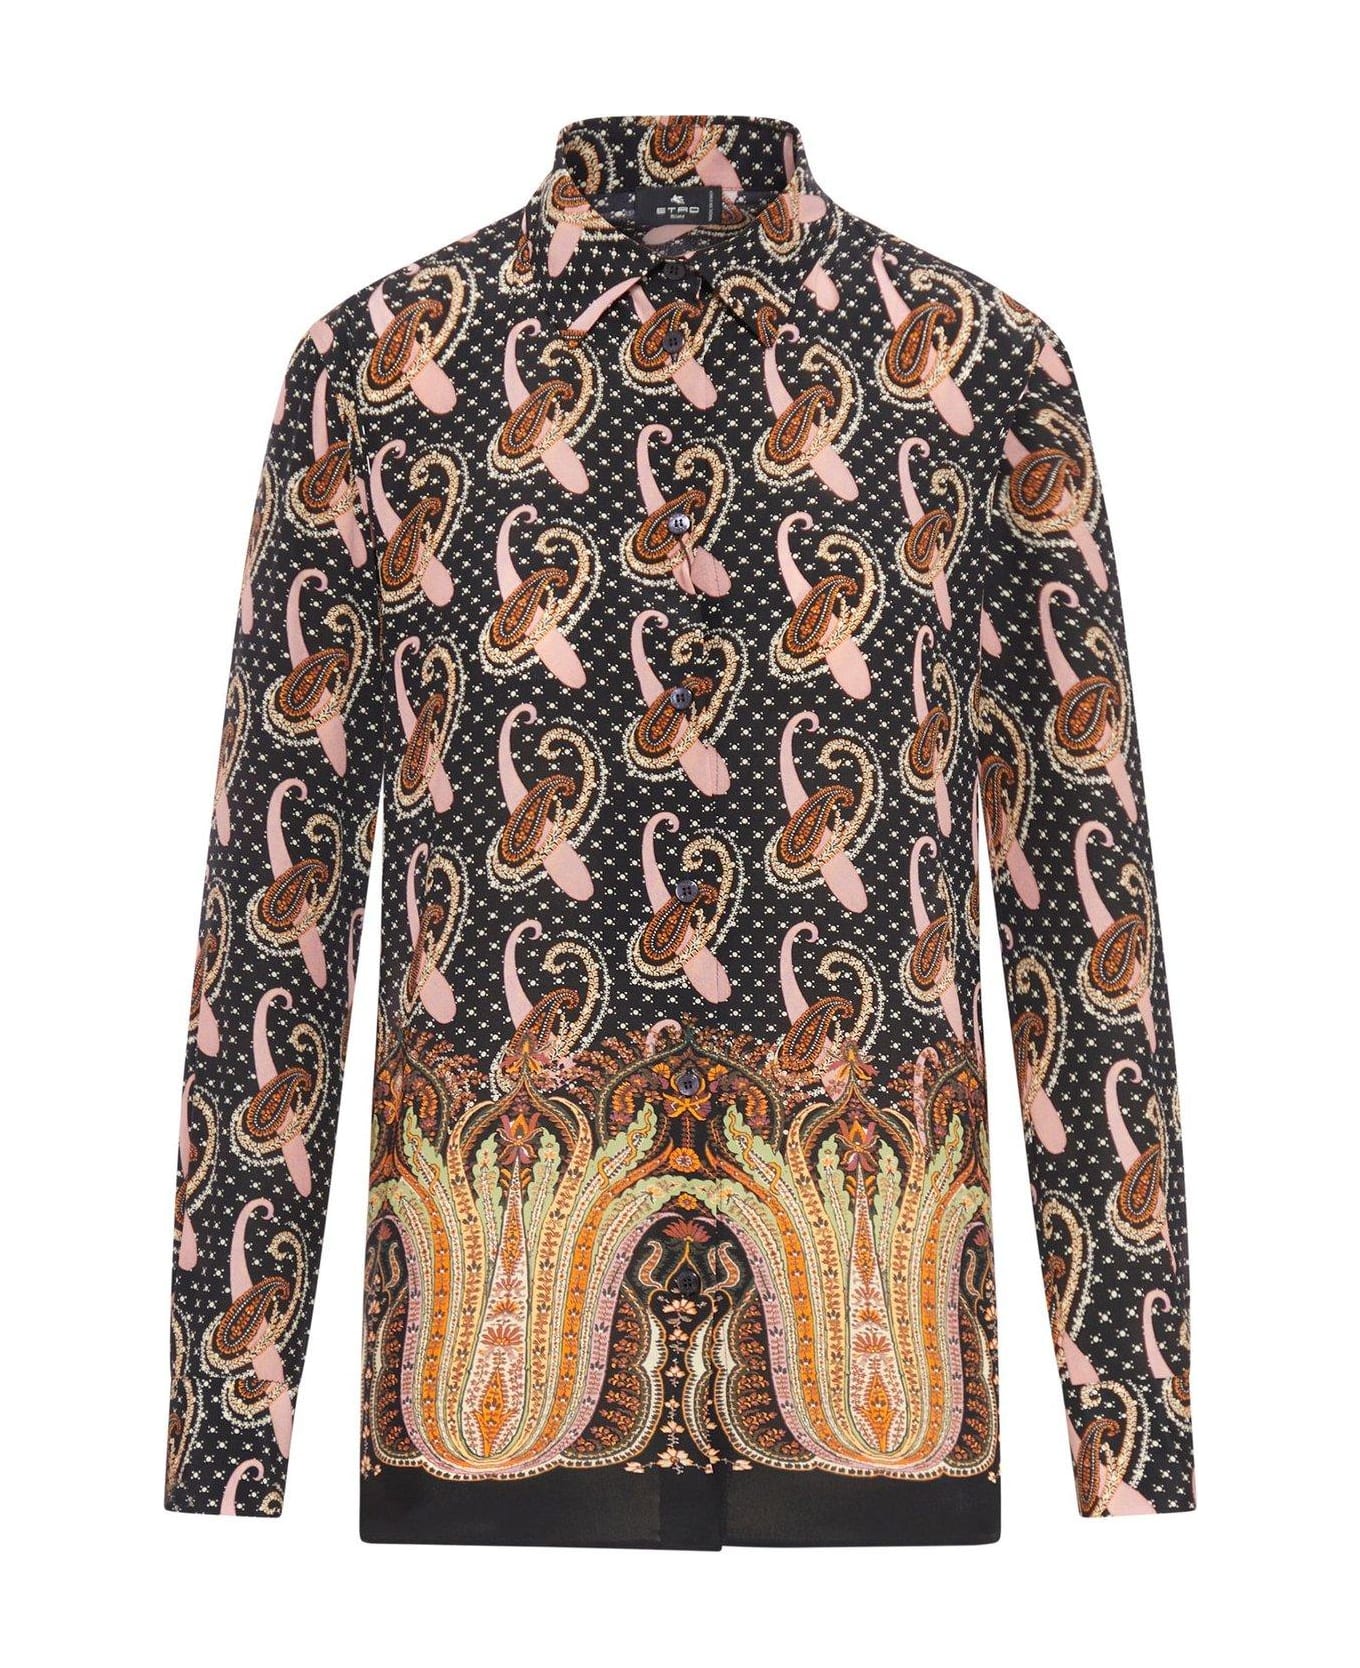 Etro All-over Patterned Long-sleeved Shirt - Nero